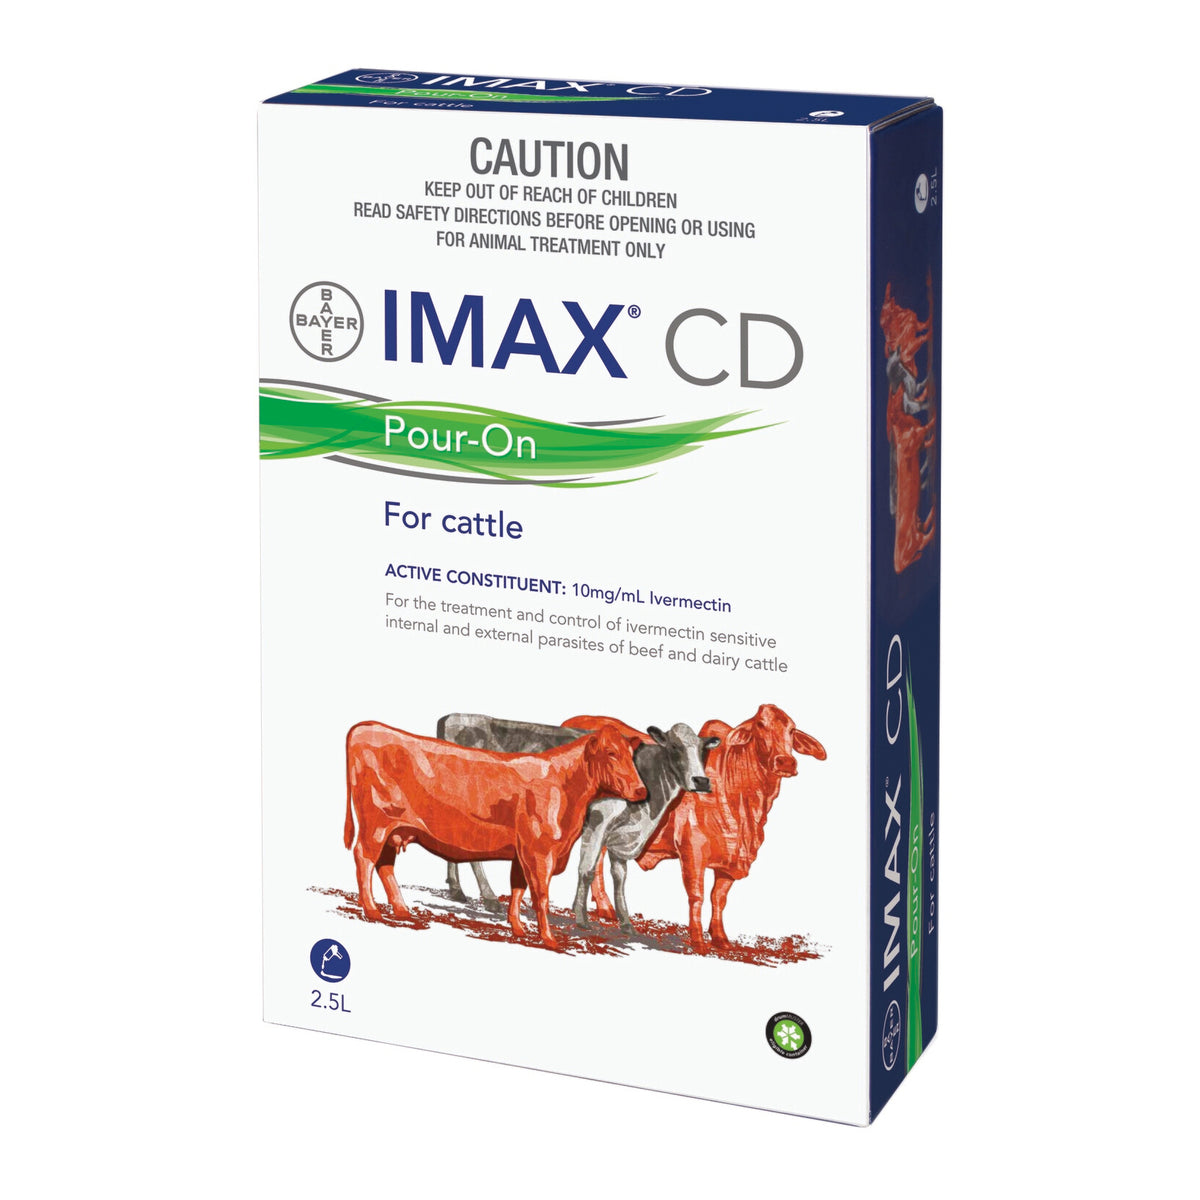 Bayer Imax CD Pour-On for Cattle